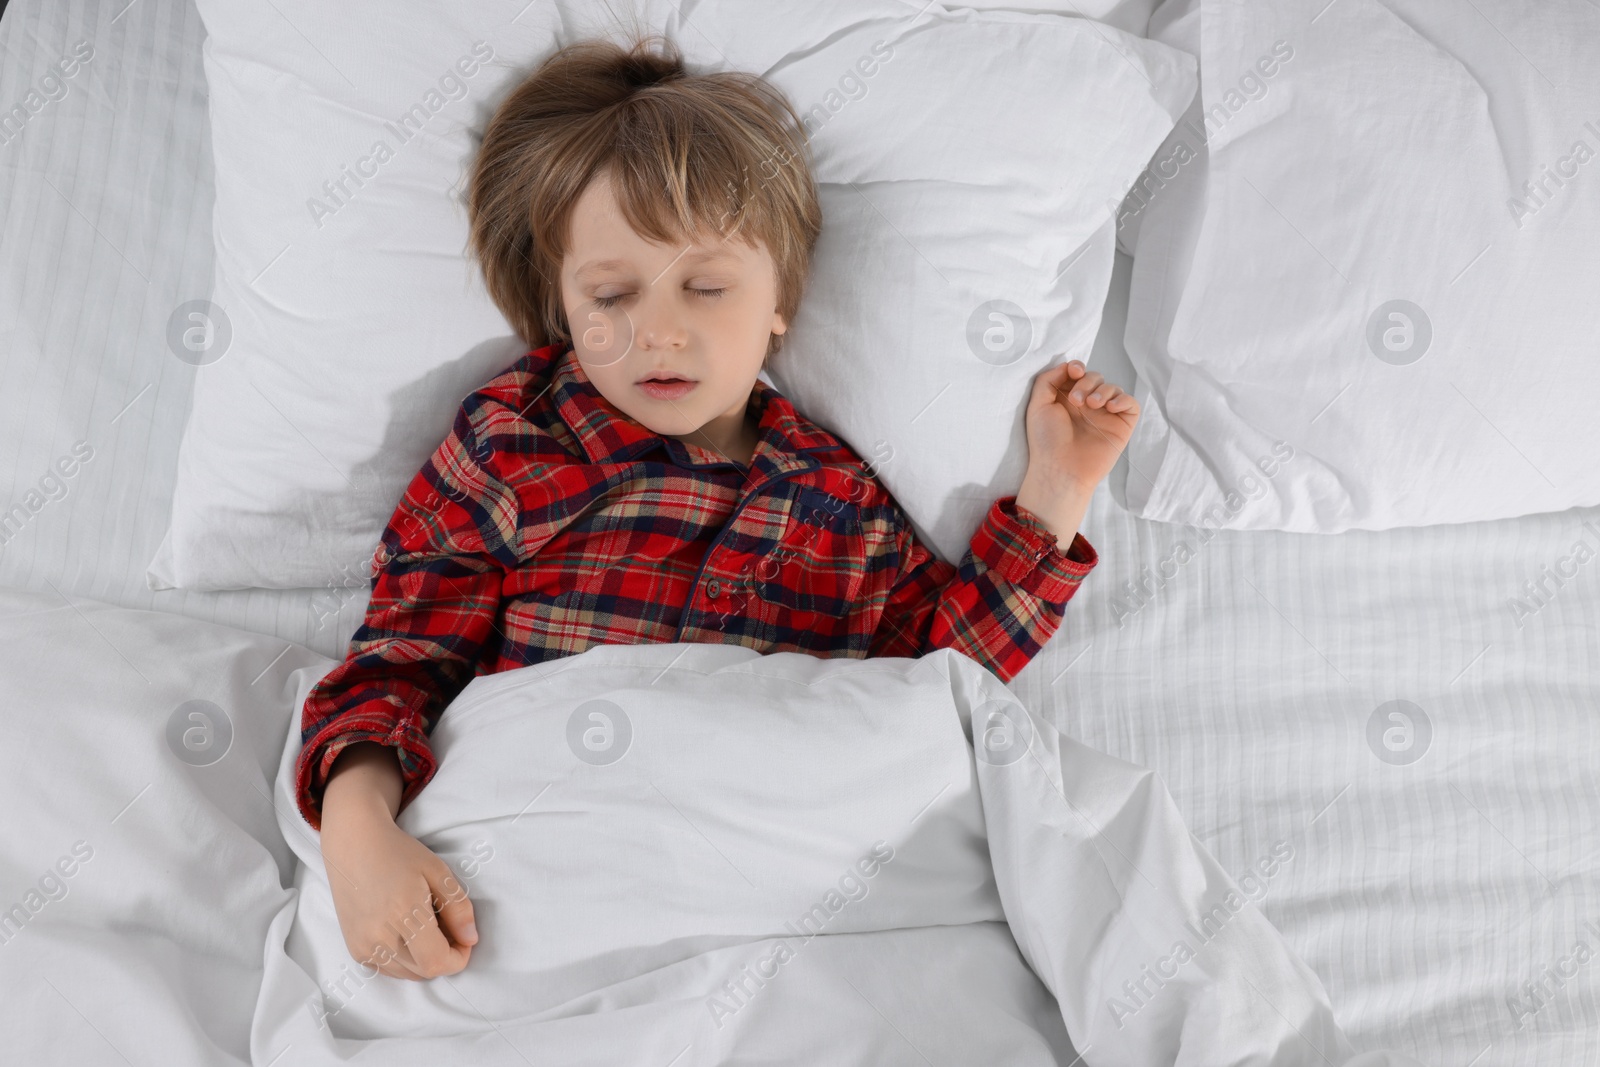 Photo of Little boy snoring while sleeping in bed, top view